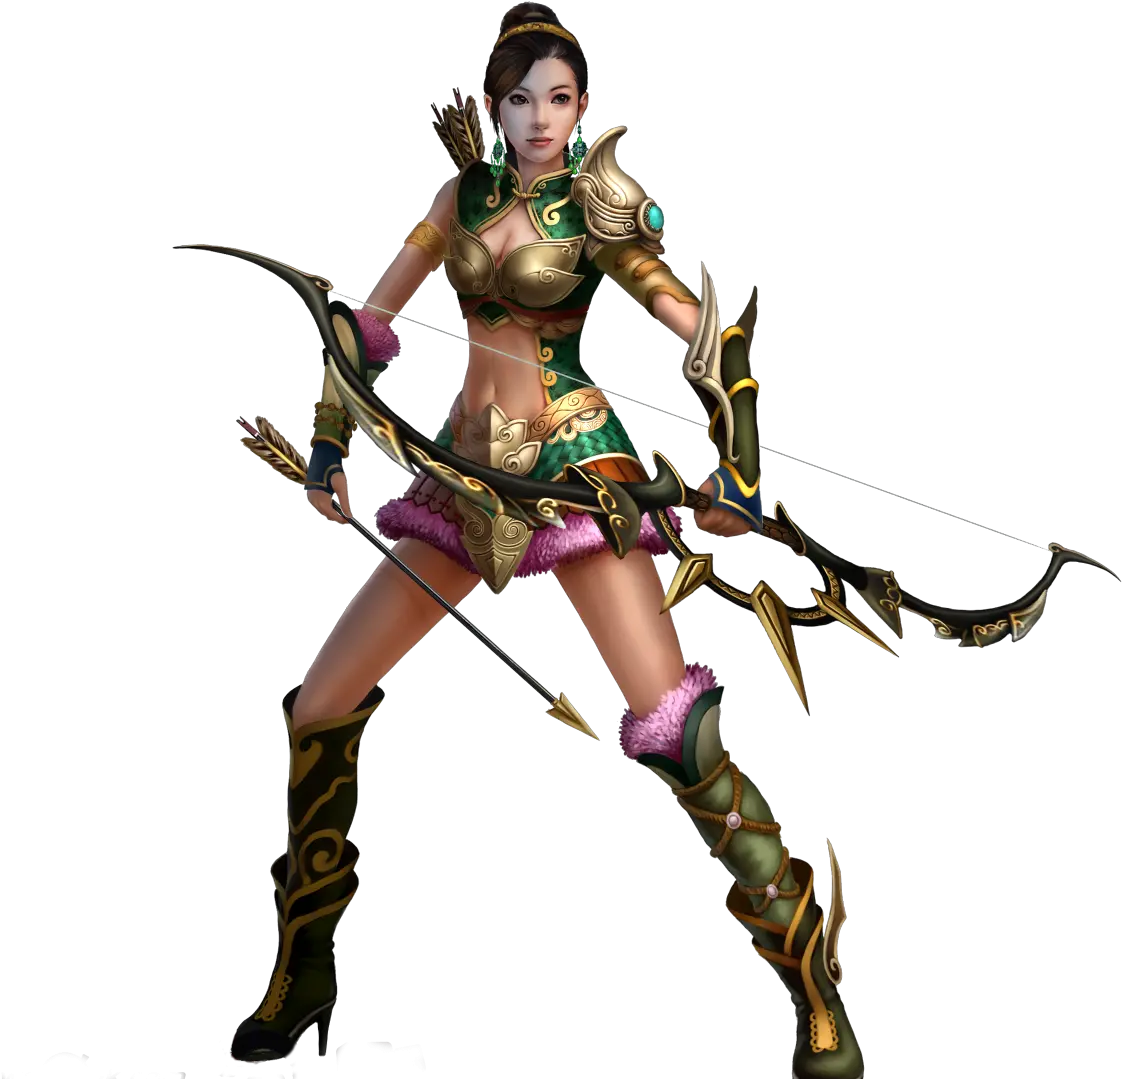 Girl With Bow And Arrow Png Full Size Download Seekpng Female Warrior Video Games Bow And Arrow Png